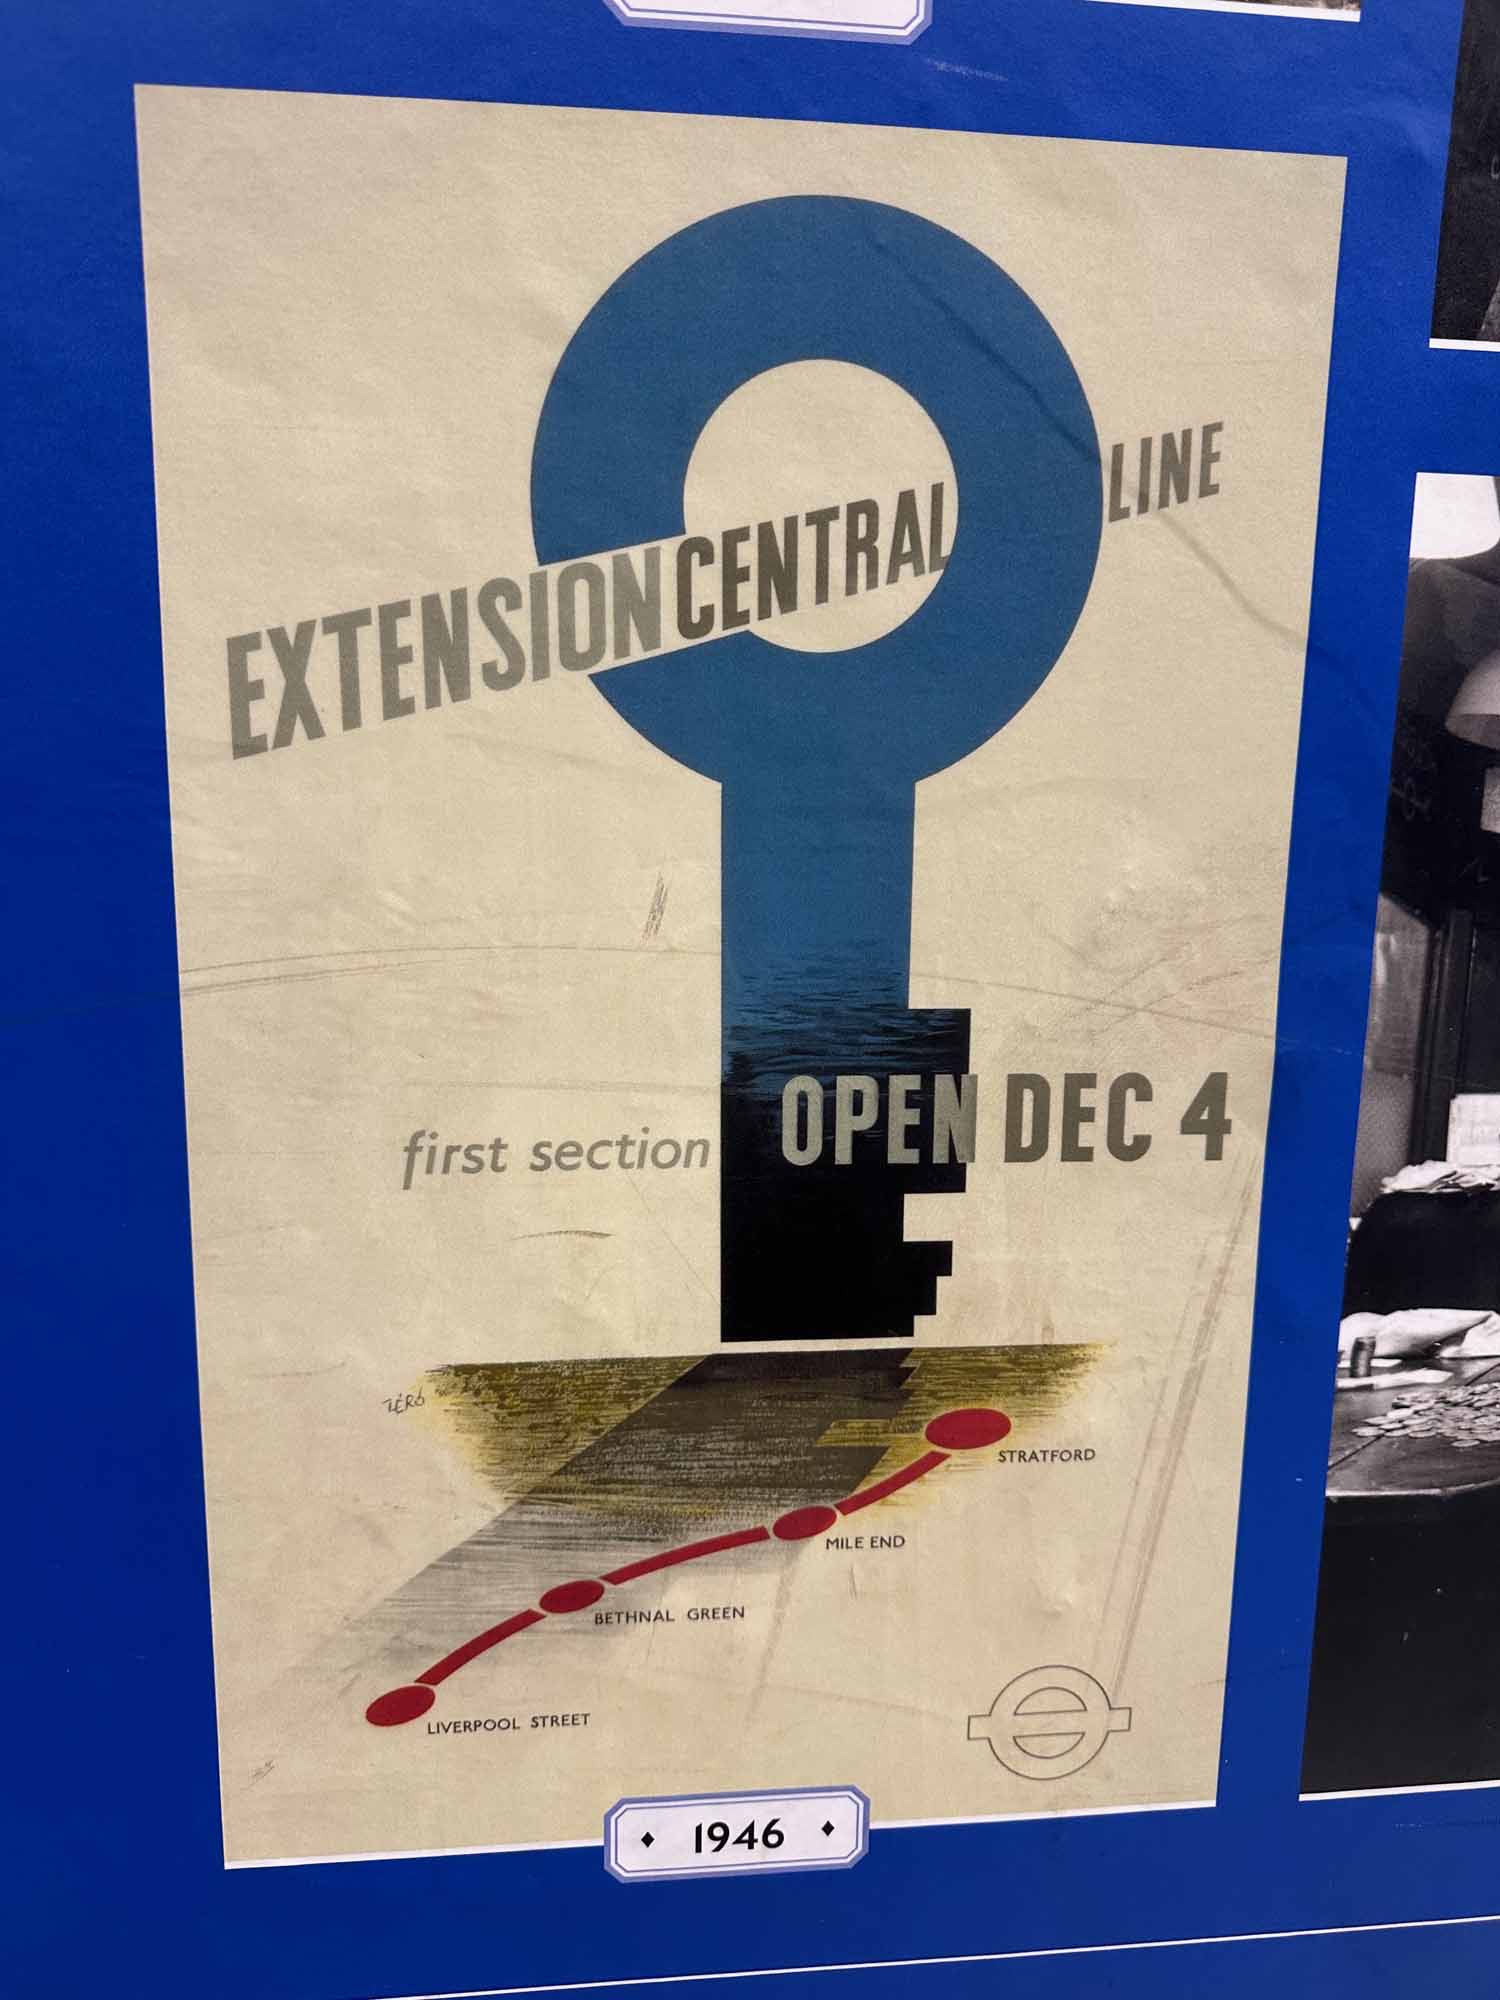 Central line - first section opening